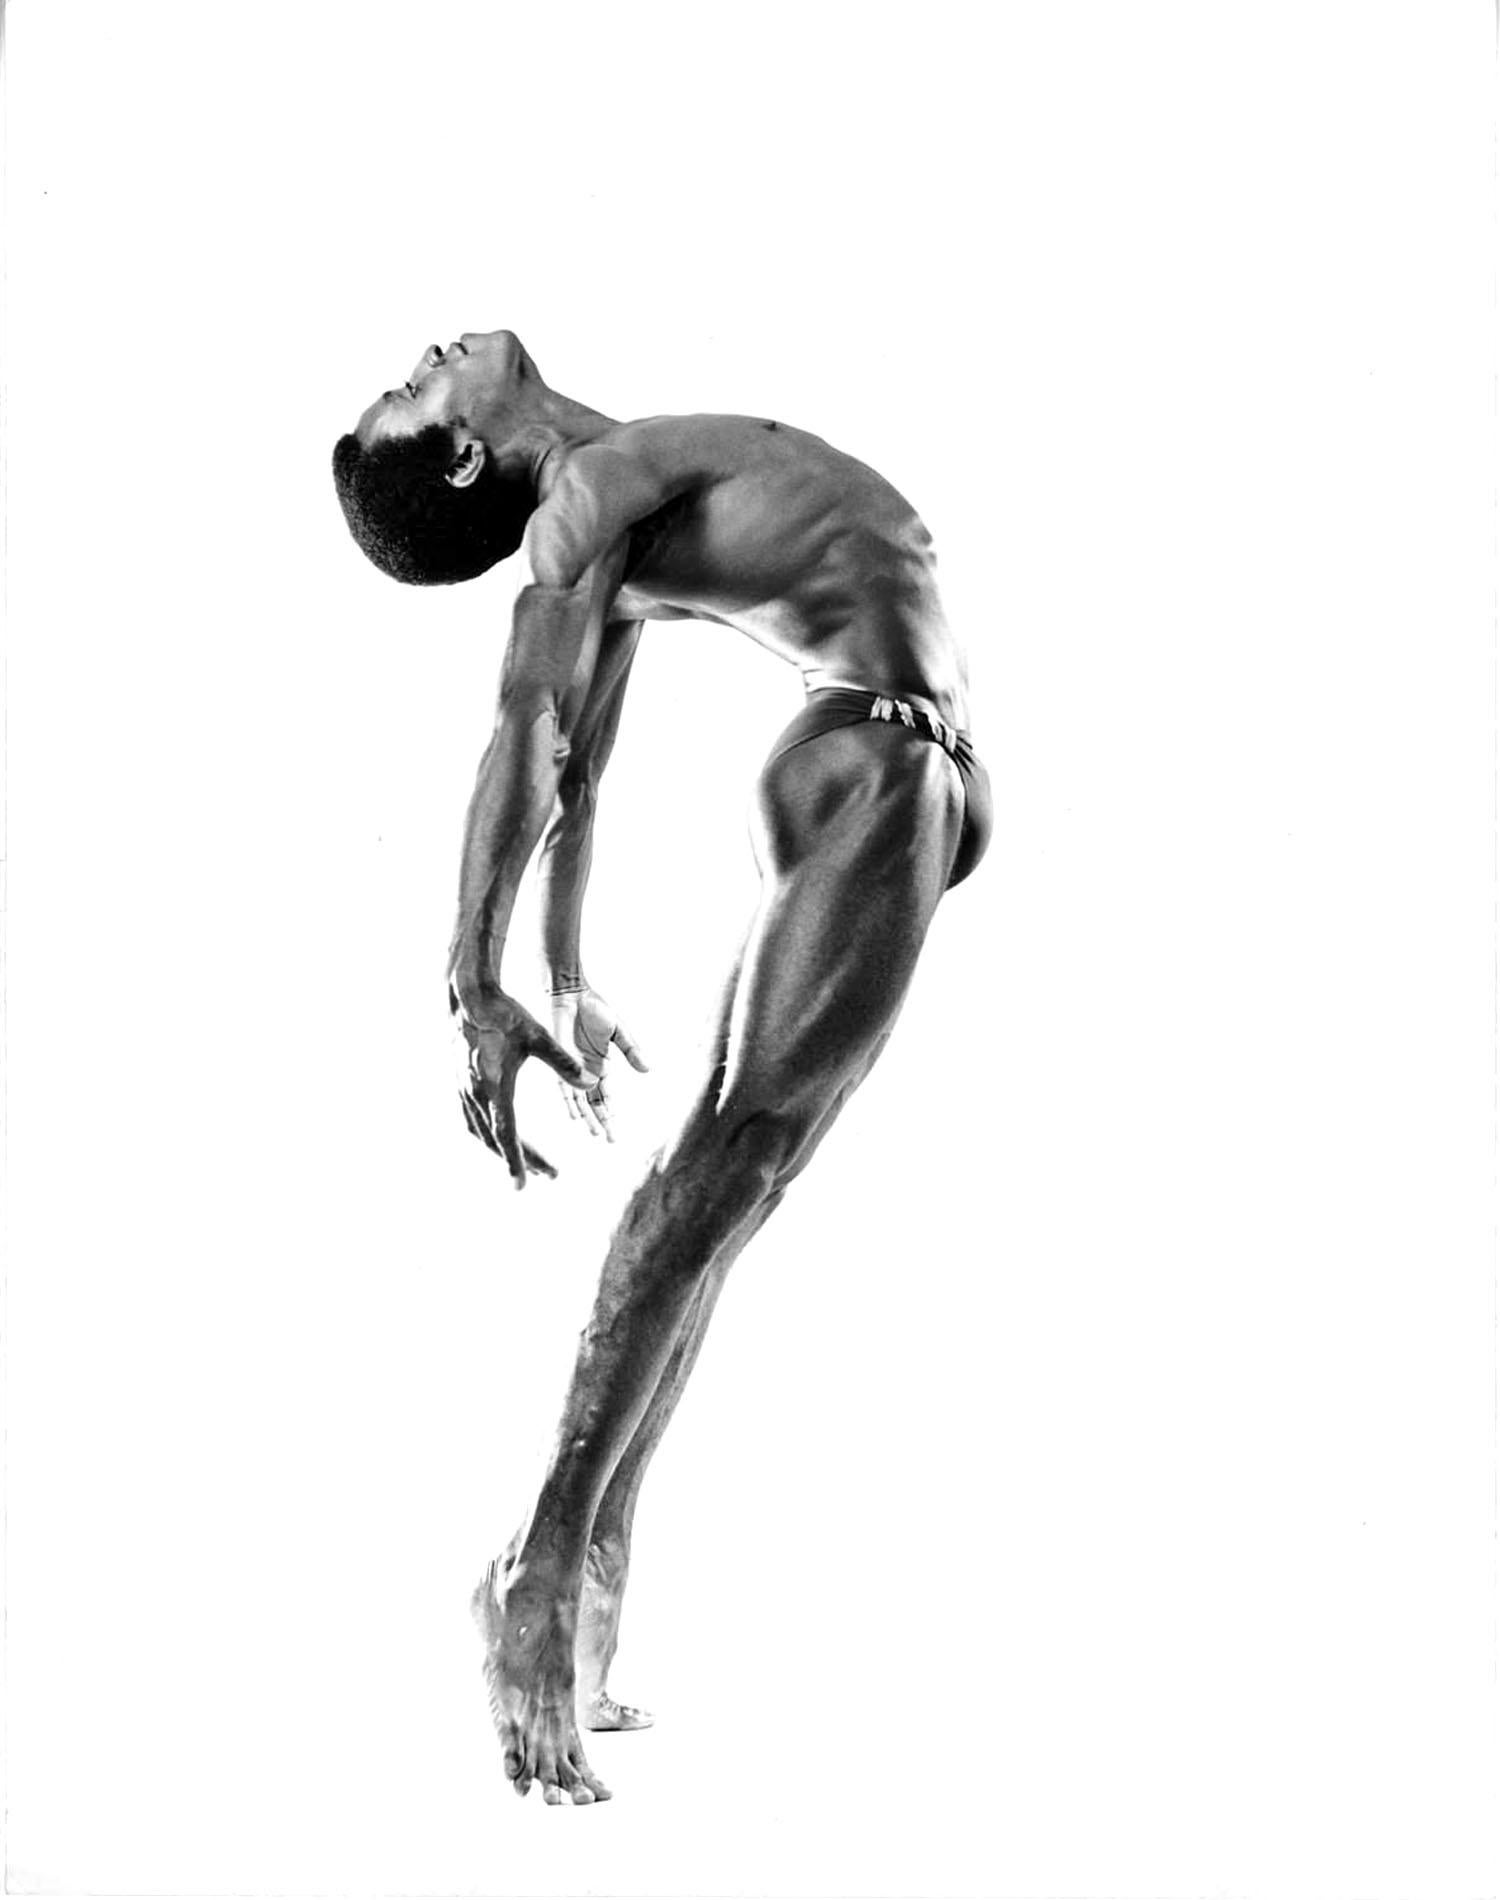 Jack Mitchell Black and White Photograph - Dance Theatre of Harlem dancer Ronald Darden